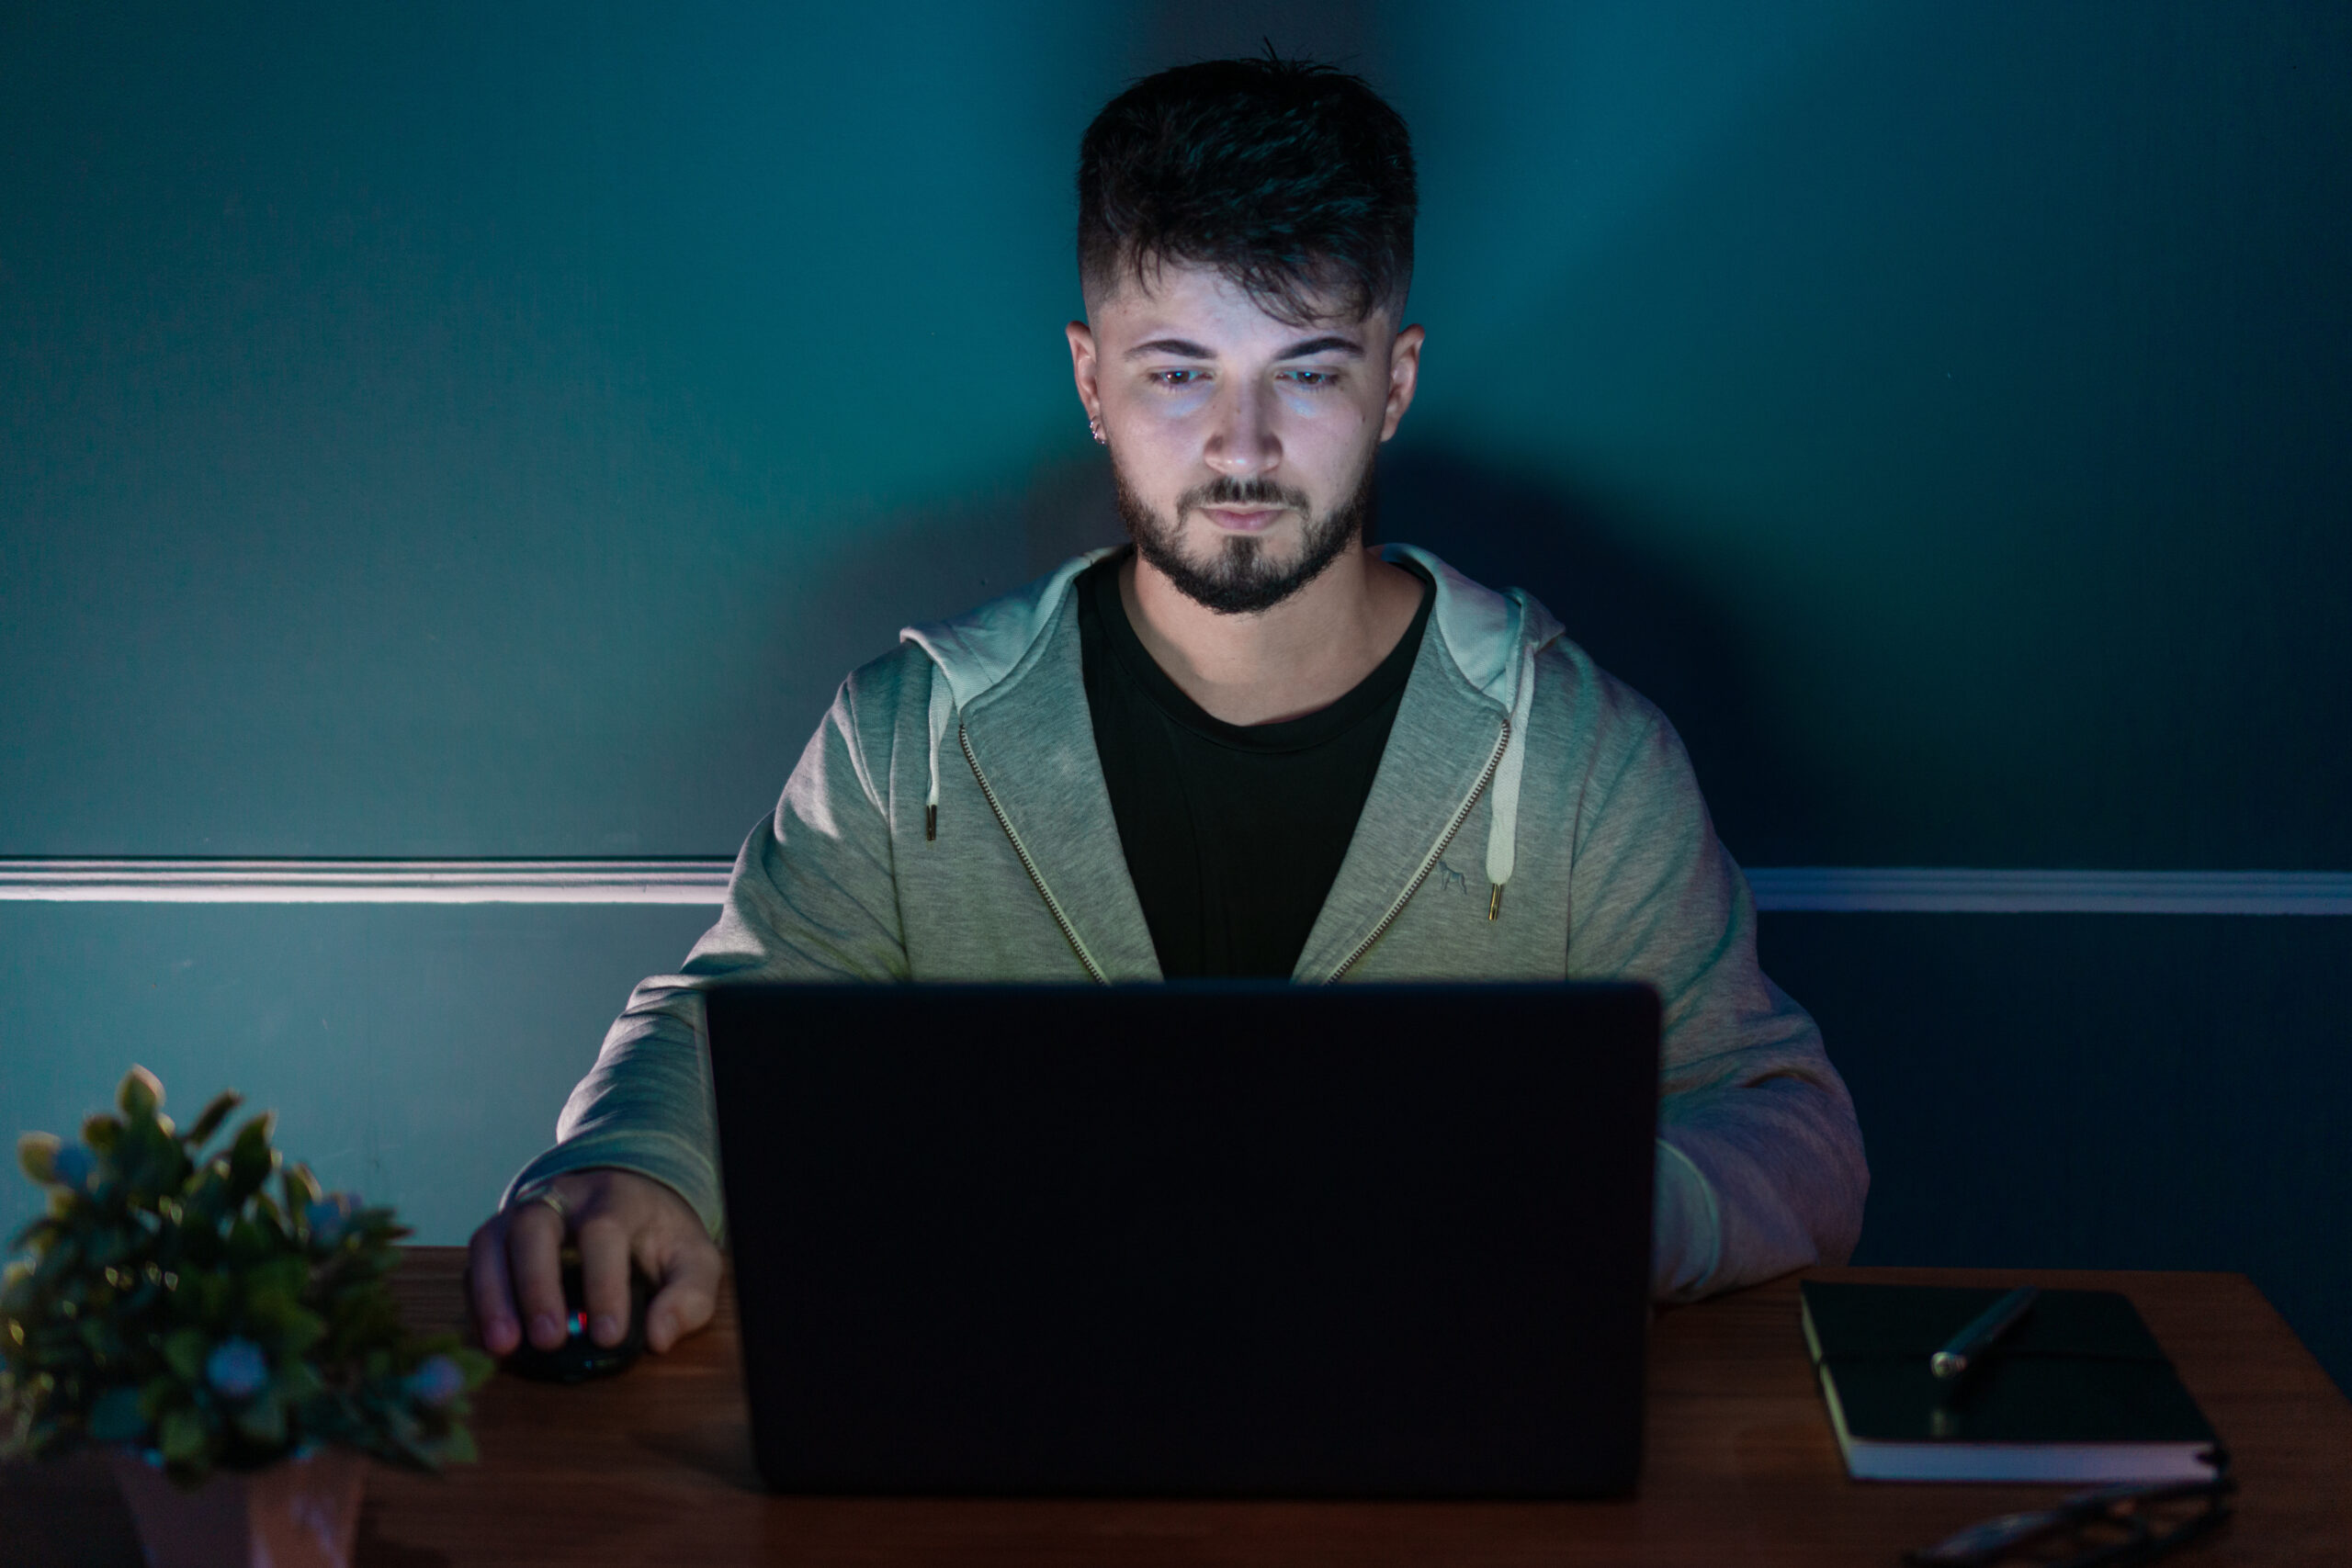 Young man in front of a computer doing work from home. All in a